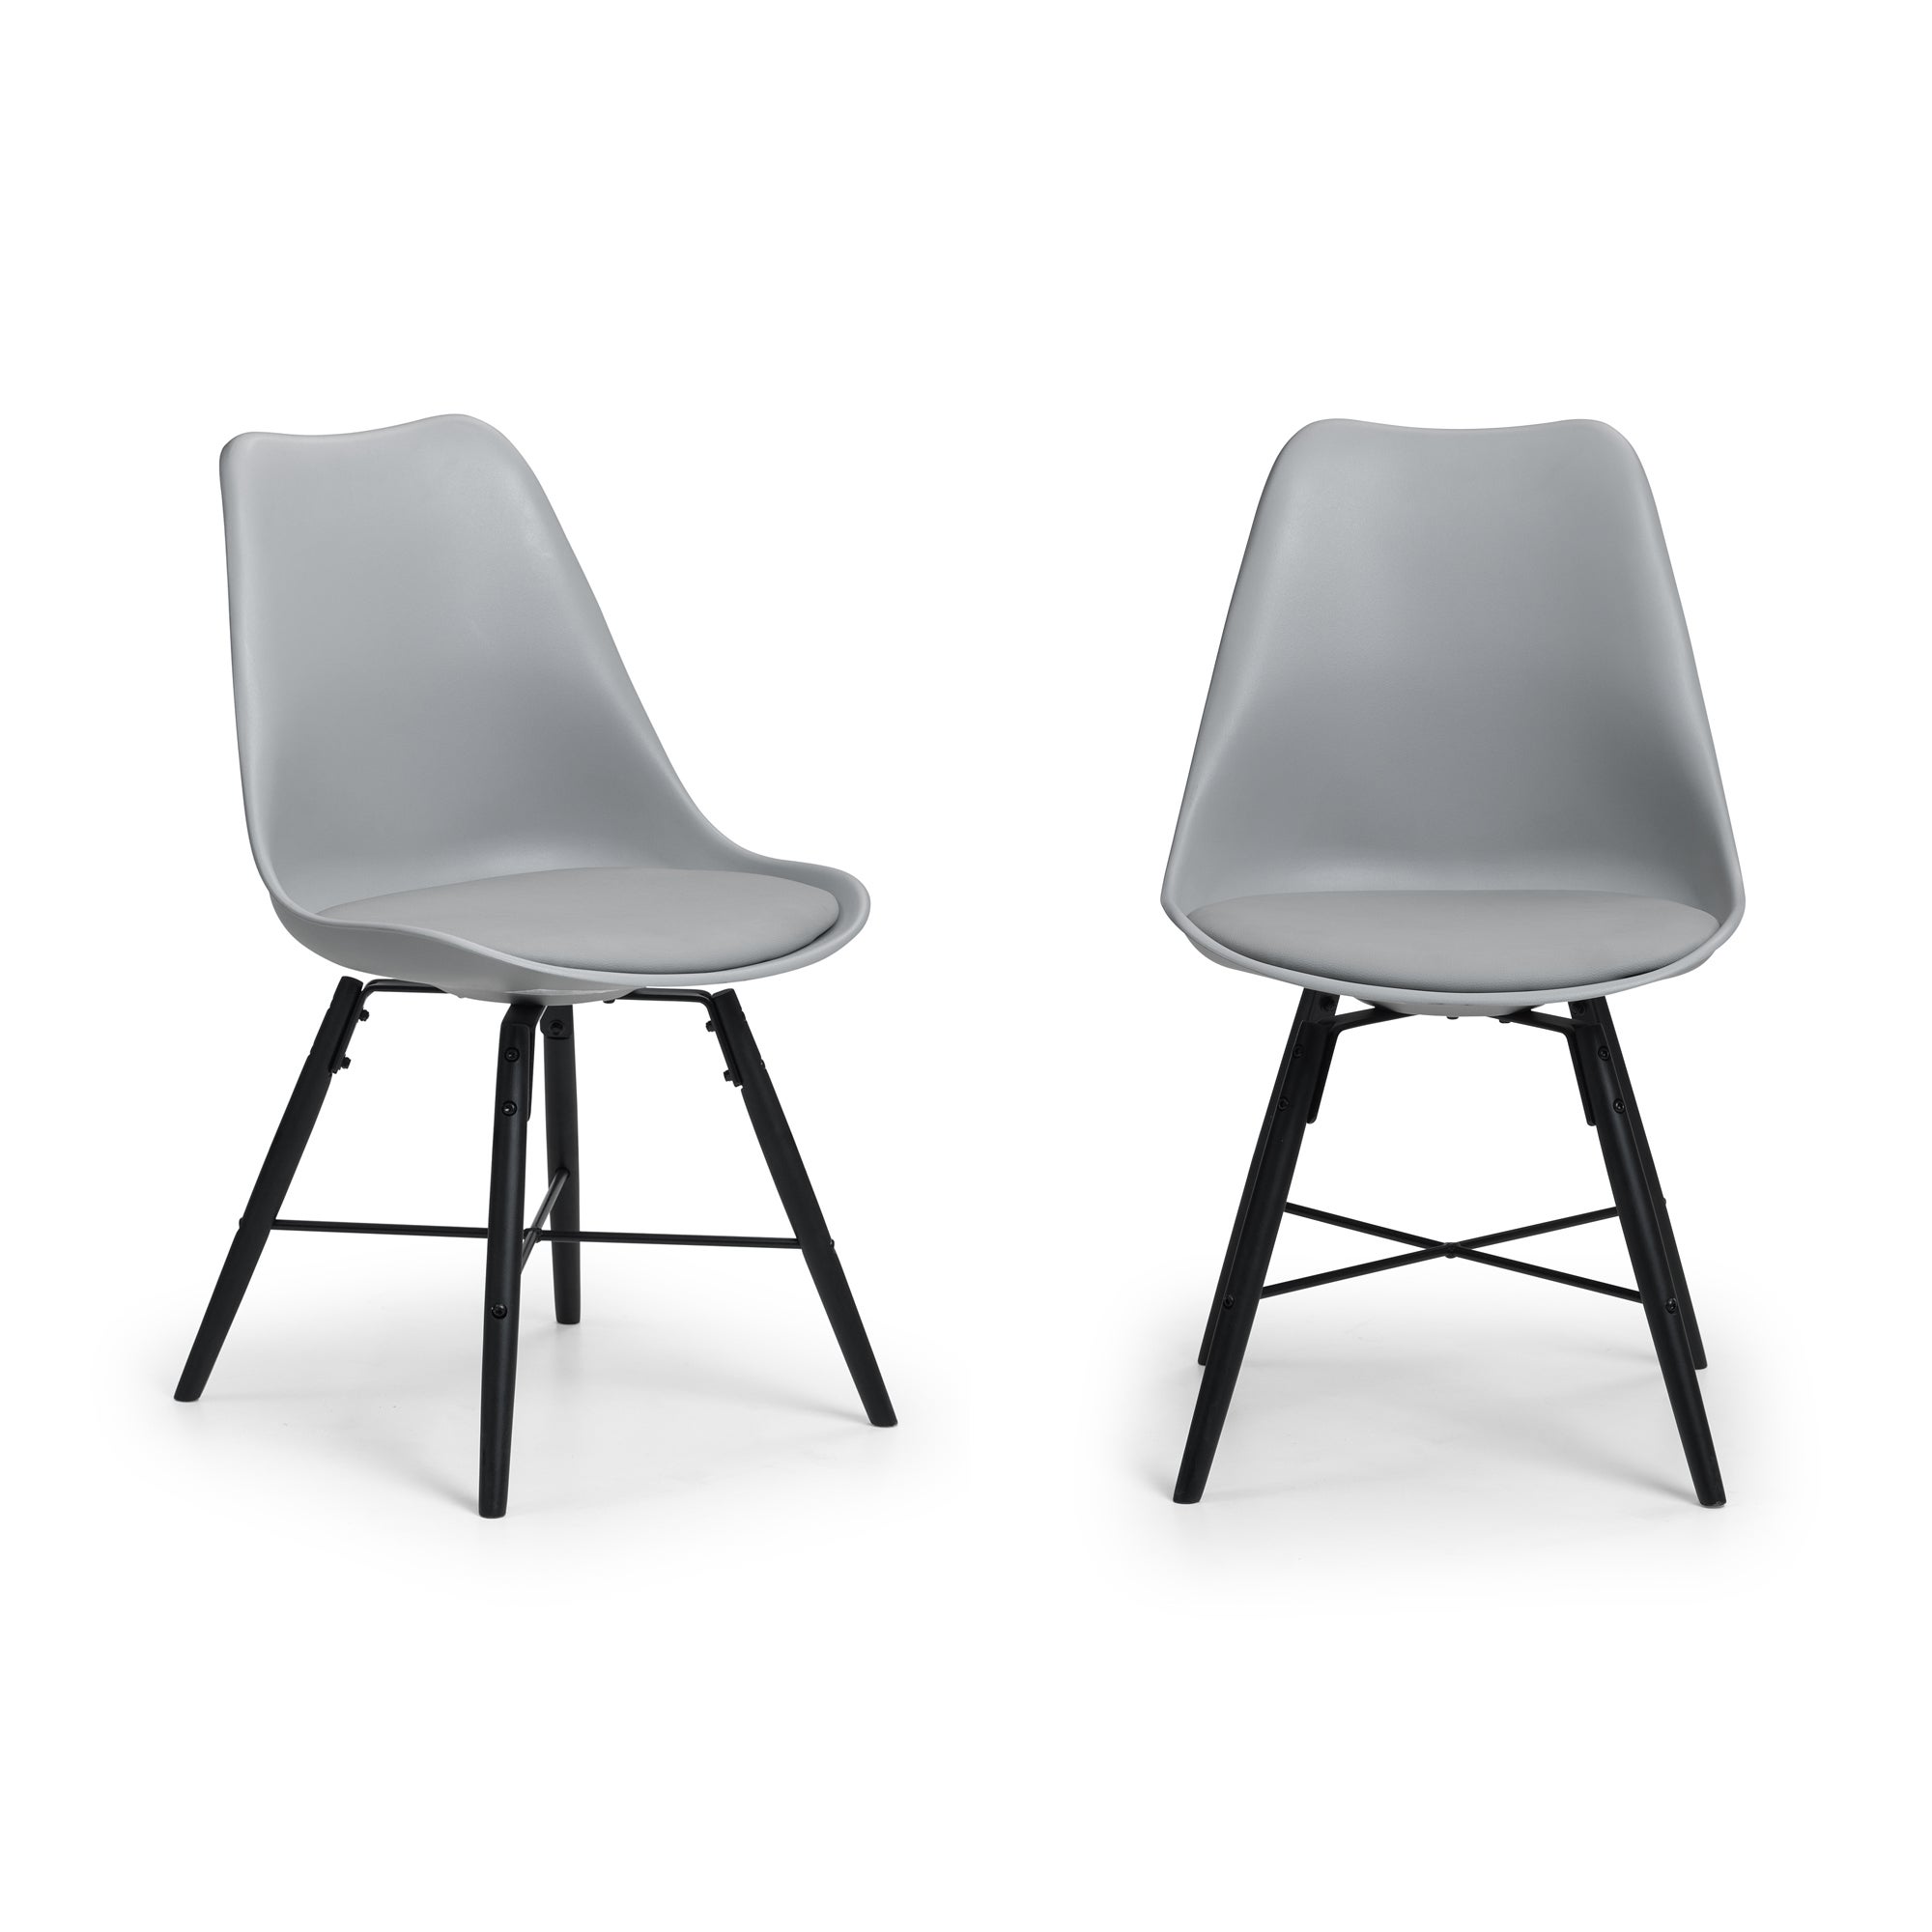 Kari Set Of 2 Dining Chairs Faux Leather Grey